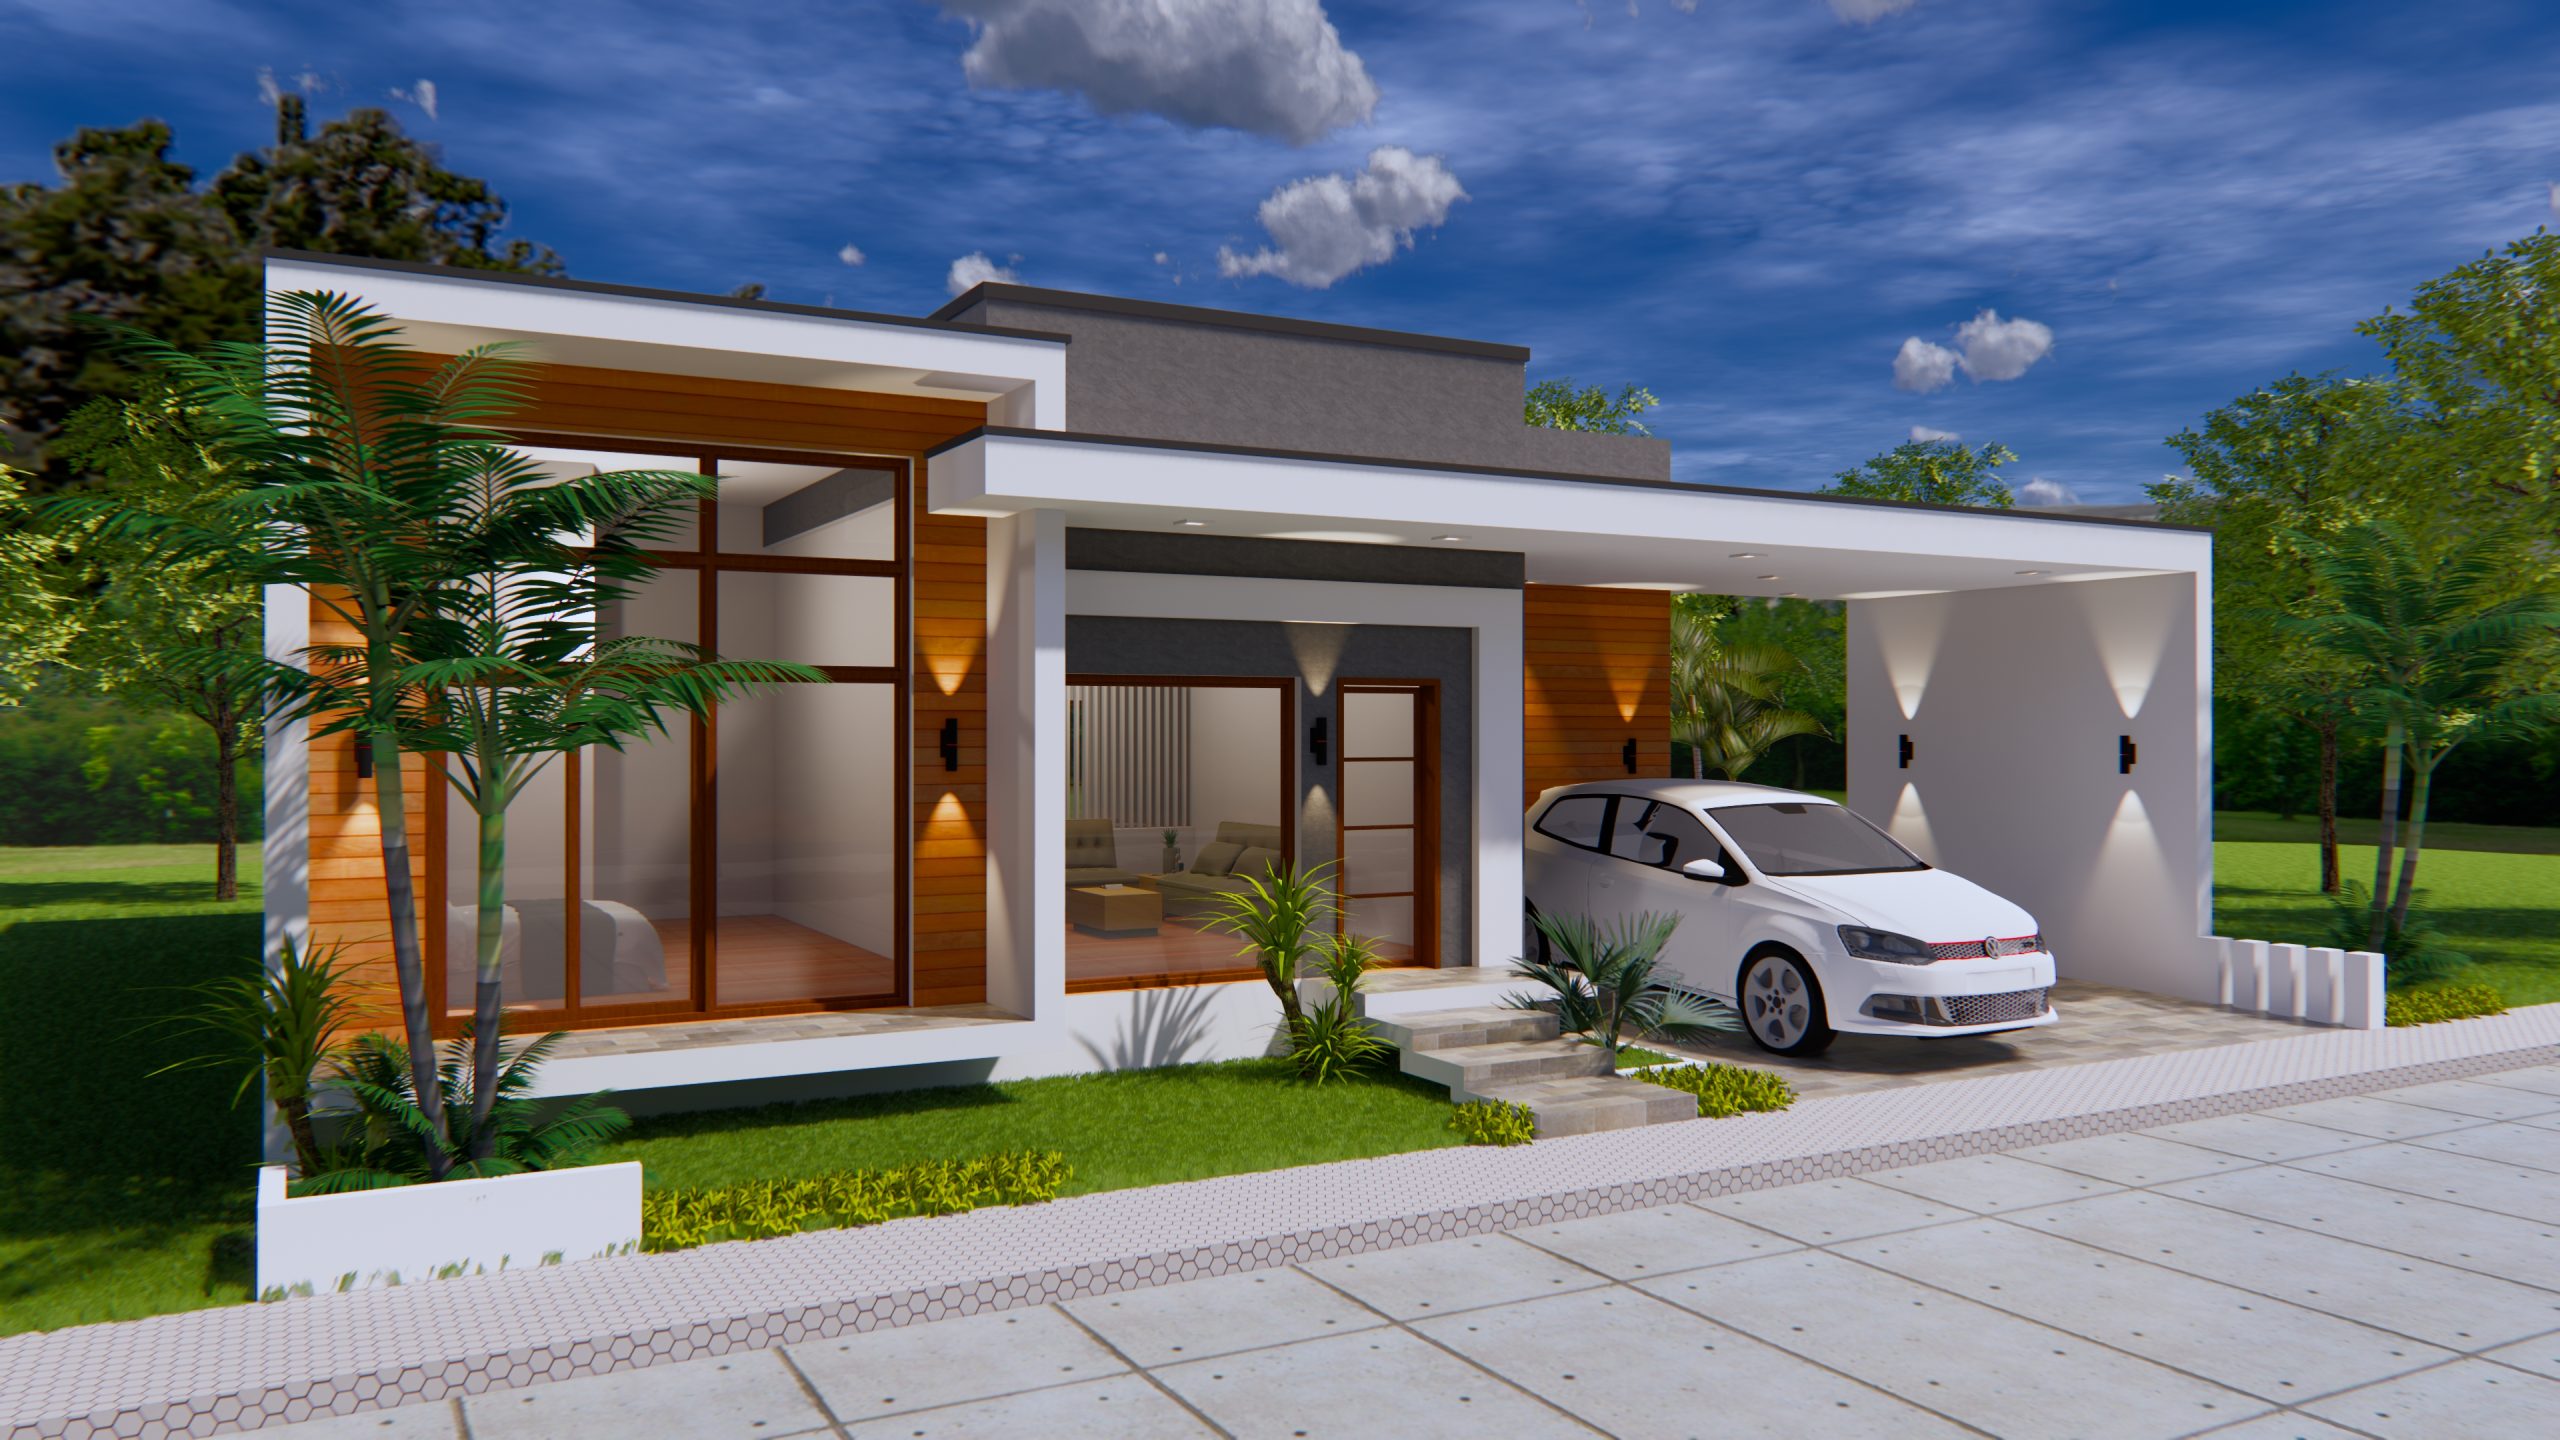 Modern-House-Plans-15x16-Meter-49x53-Feet-3-Beds-1-scaled